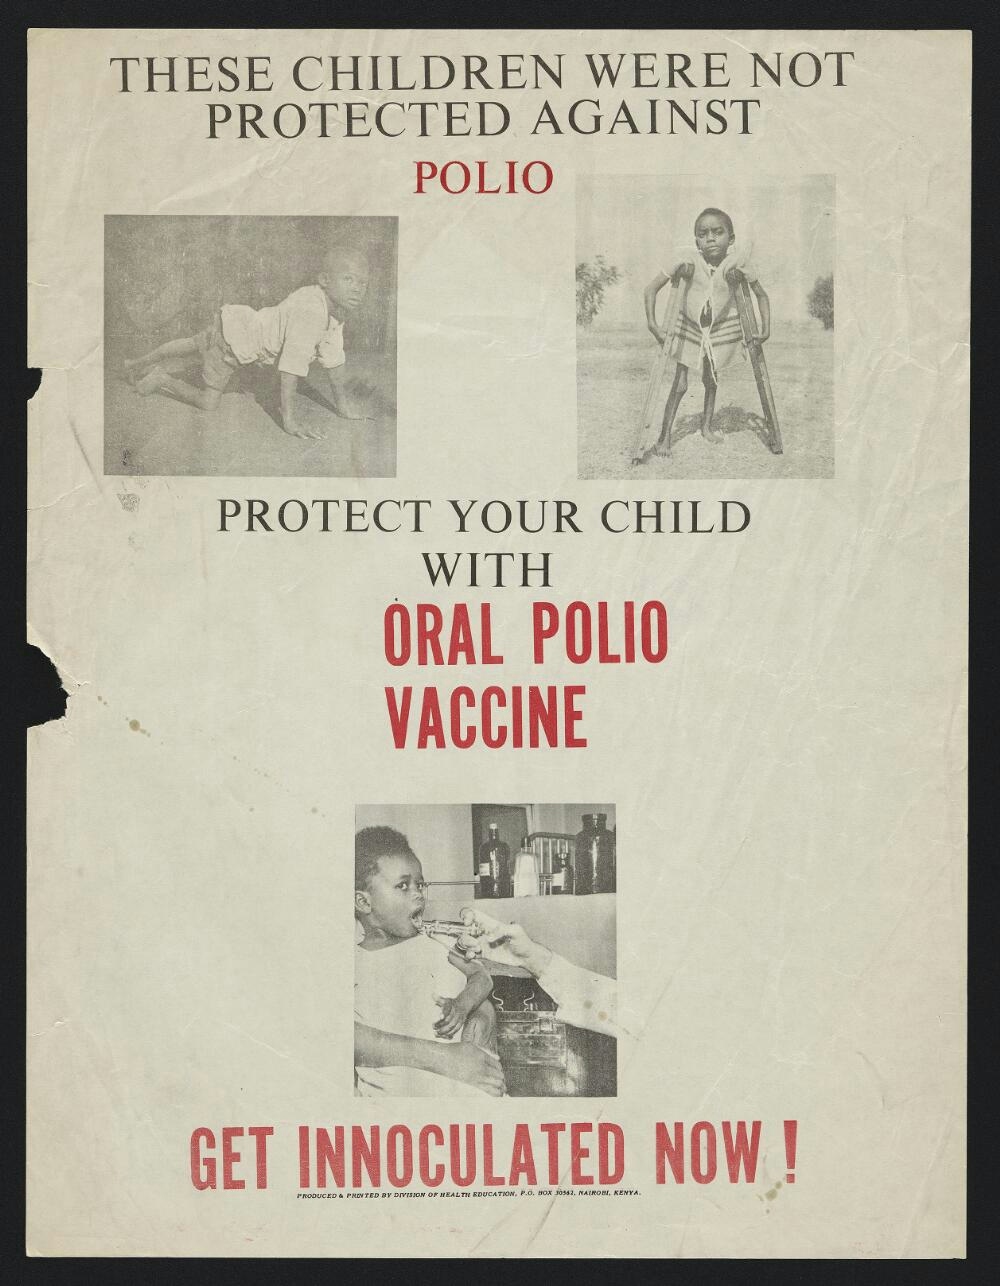 Poster showing two children with disabilities and another receiving a vaccine.  Next to the two children with disabilities is the text: 'THESE CHILDREN WERE NOT PROTECTED AGAINST POLIO.'  Next to the image of the child being vaccinated is the text: 'PROTECT YOUR CHILD WITH ORAL POLIO VACCINE.  GET INNOCULATED [sic] NOW!'